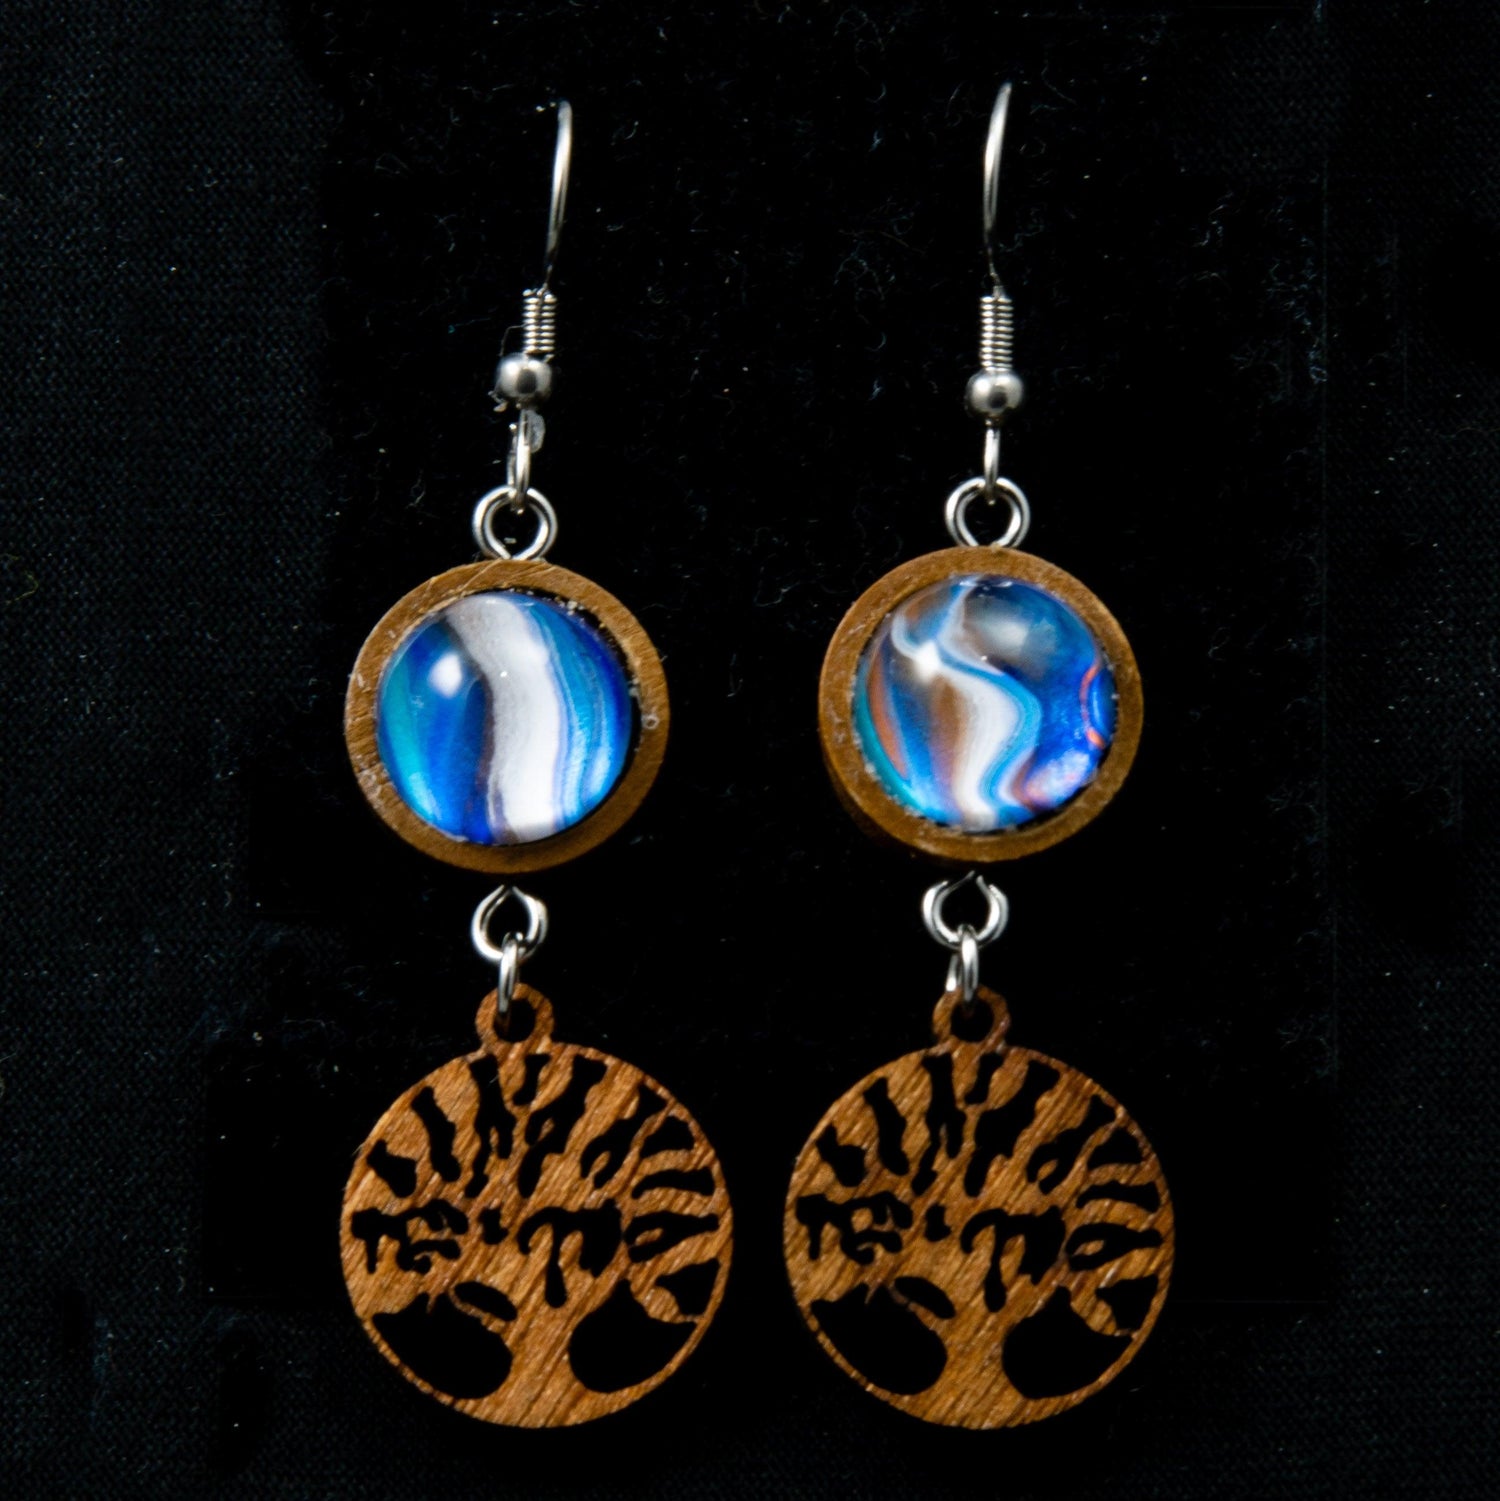 Wooden Wearable Art Fish Hook Earrings with Tree of Life Charm - Cinder House Creations